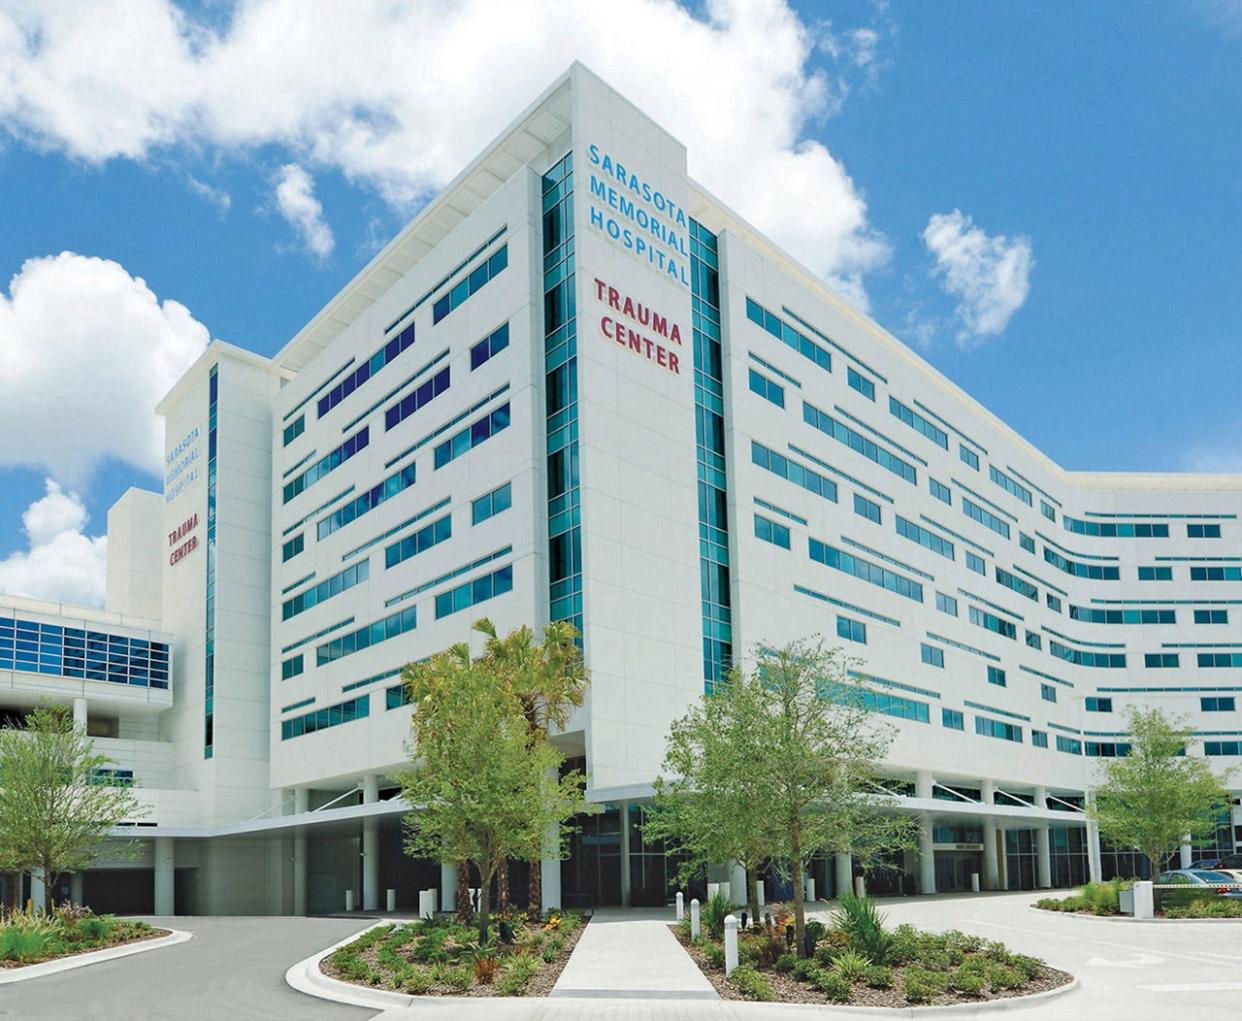 Sarasota Memorial Health Care System was recently named among the top 150 places to work in healthcare by Becker's Healthcare, a leading source of healthcare information through its medical industry trade magazine, “Becker’s Hospital Review.”